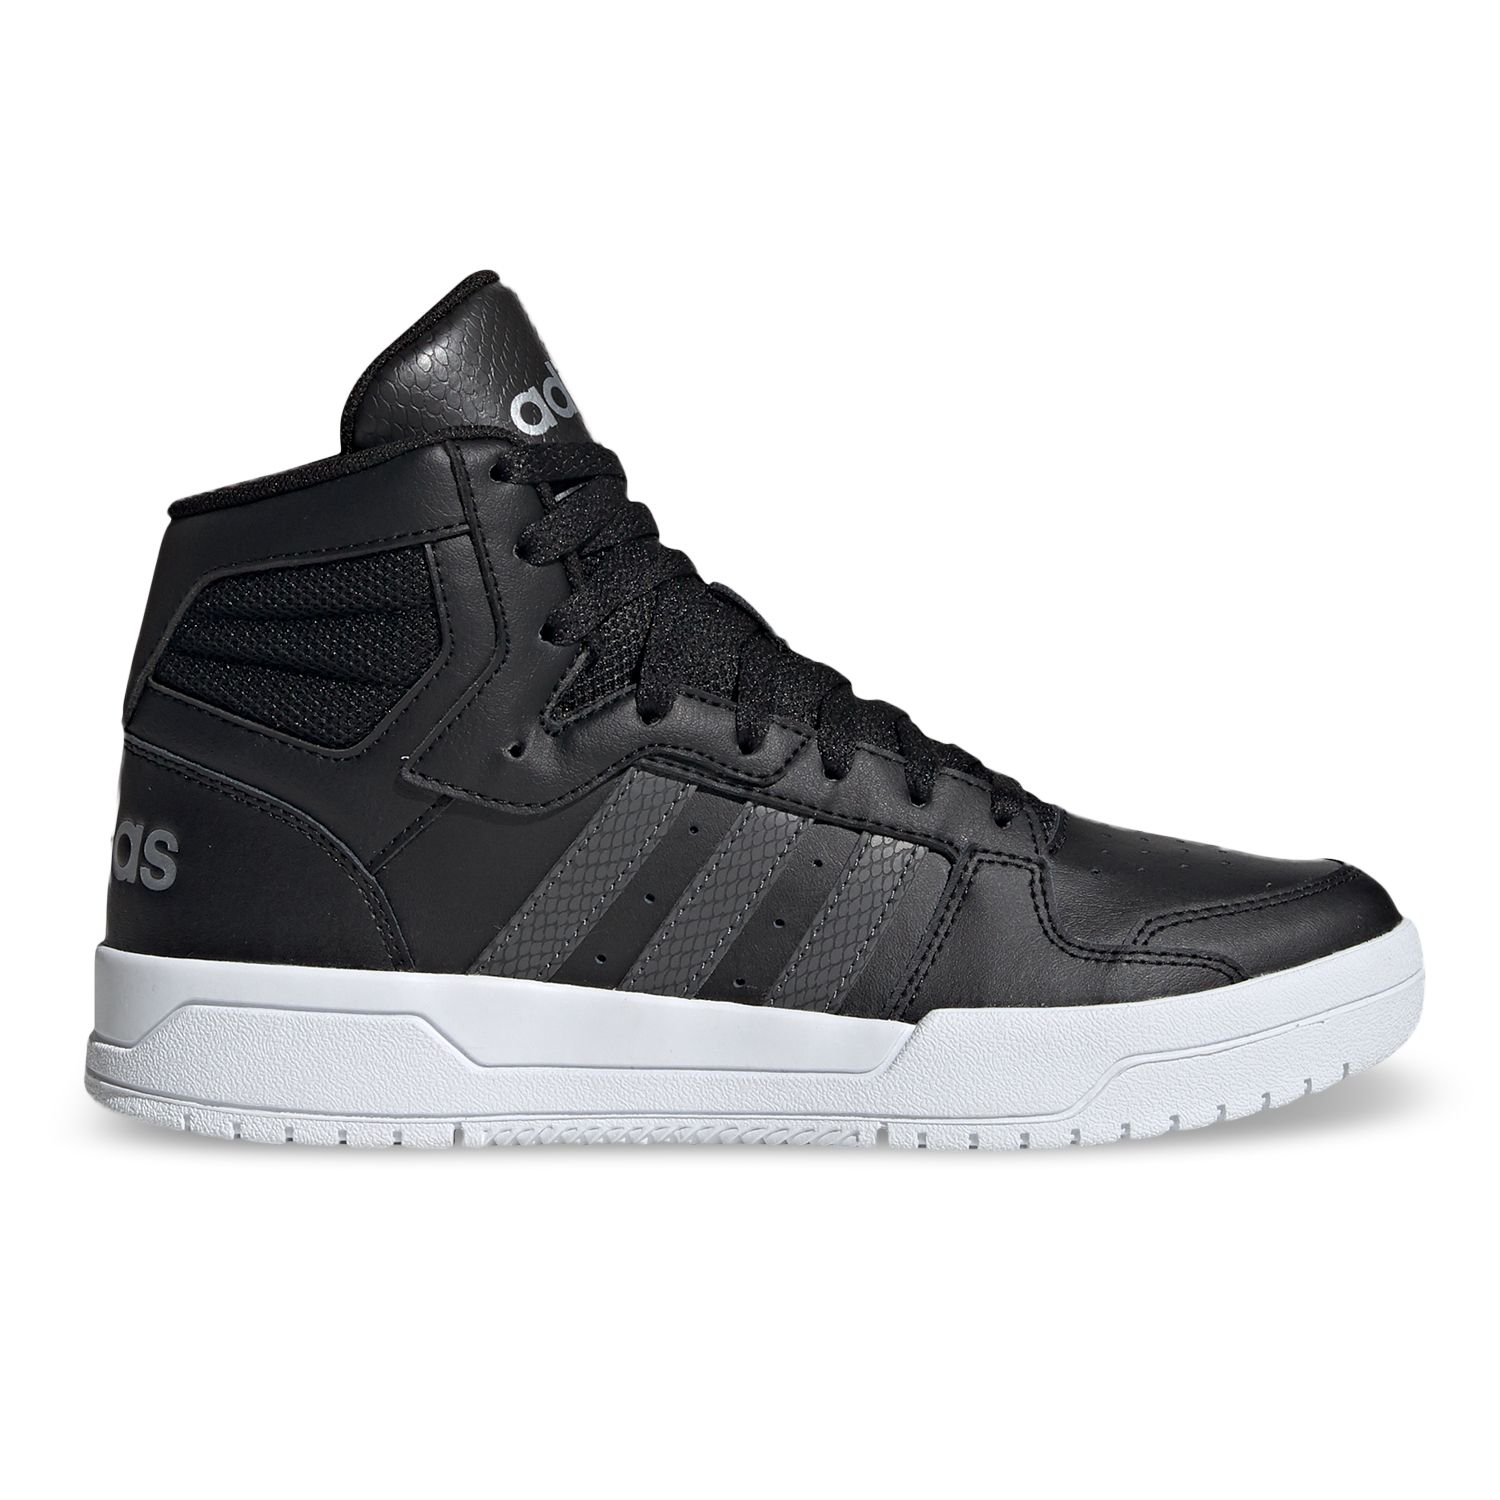 adidas Entrap Mid Women's Sneakers